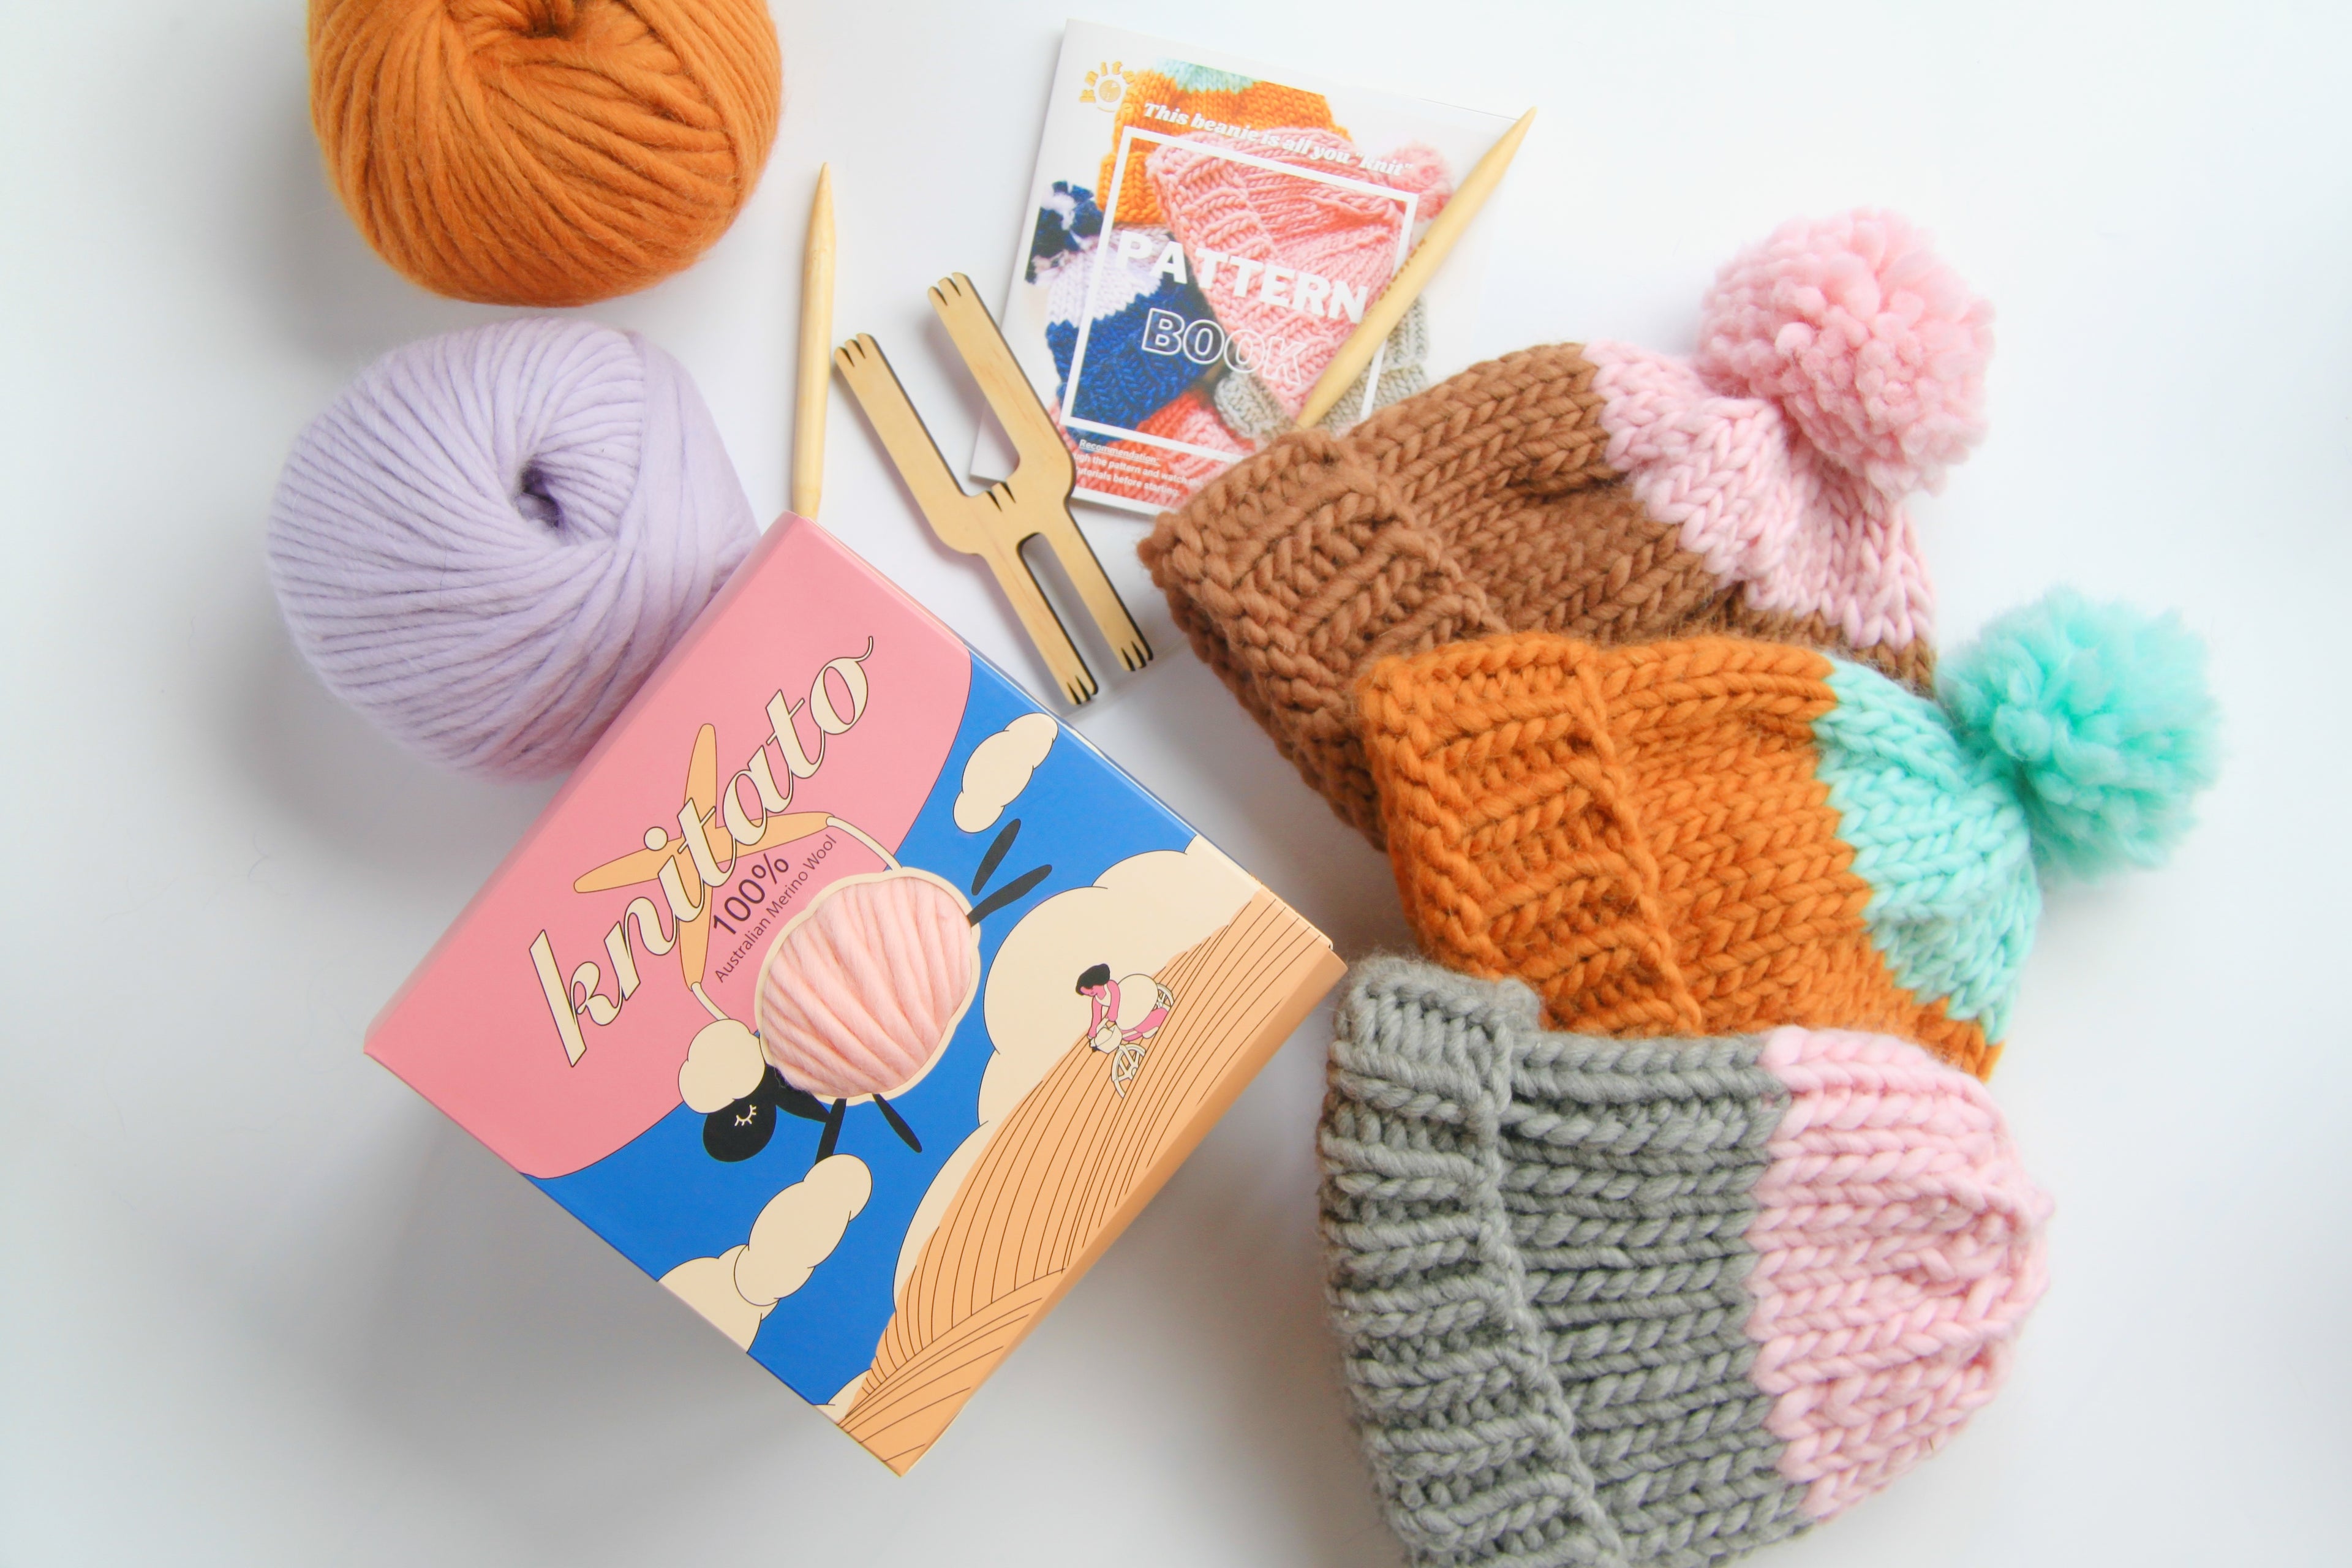 BEGINNERS KNITTING KIT Learn to Knit Complete Instructions